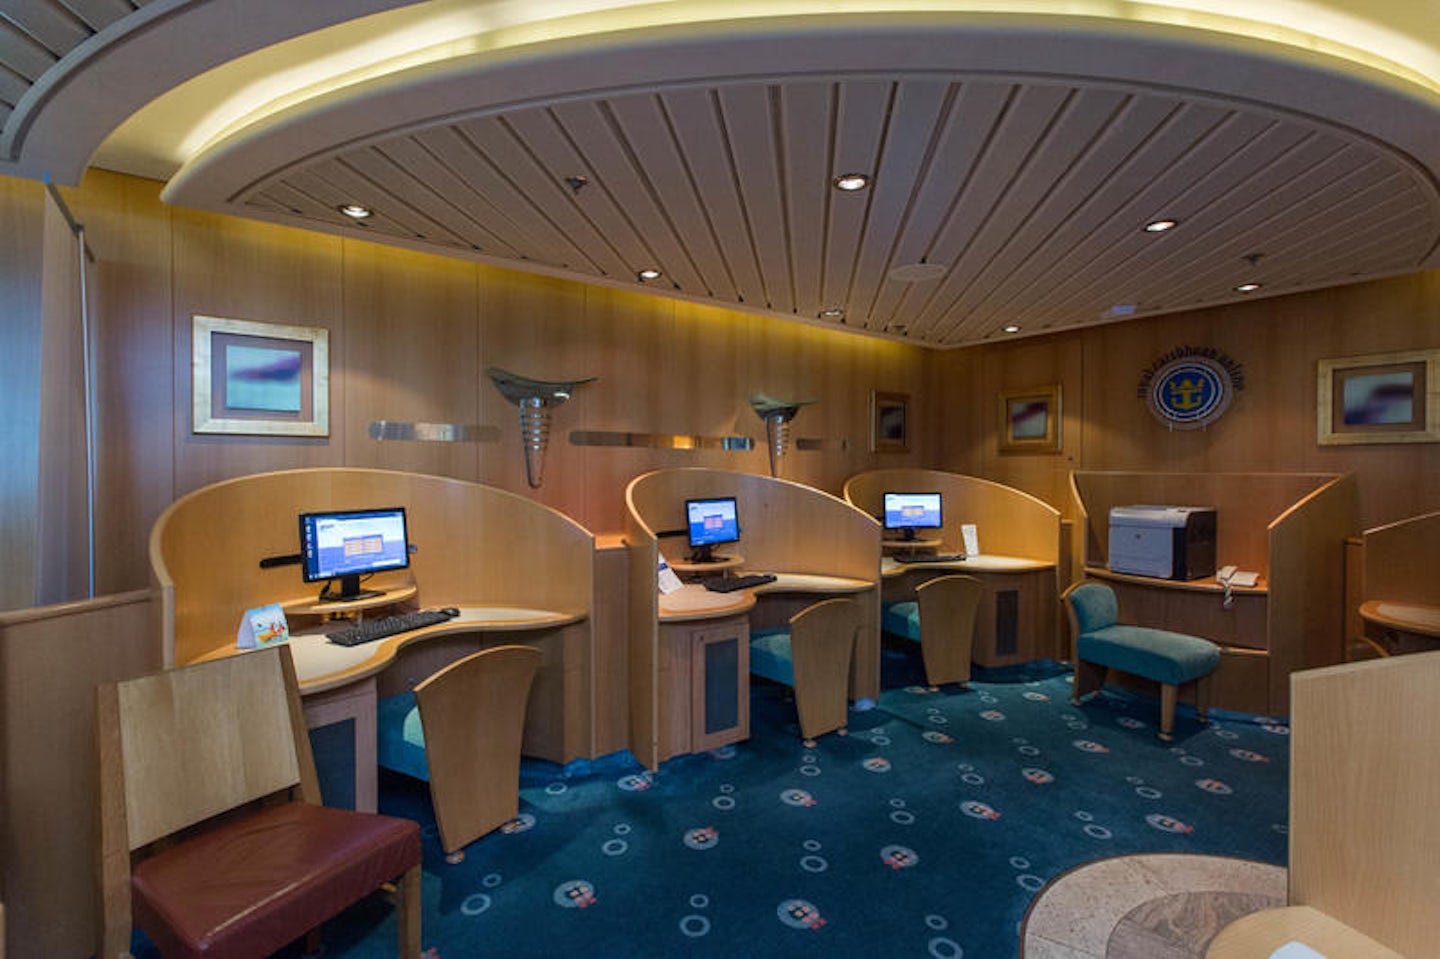 Royal Carribean Online on Radiance of the Seas